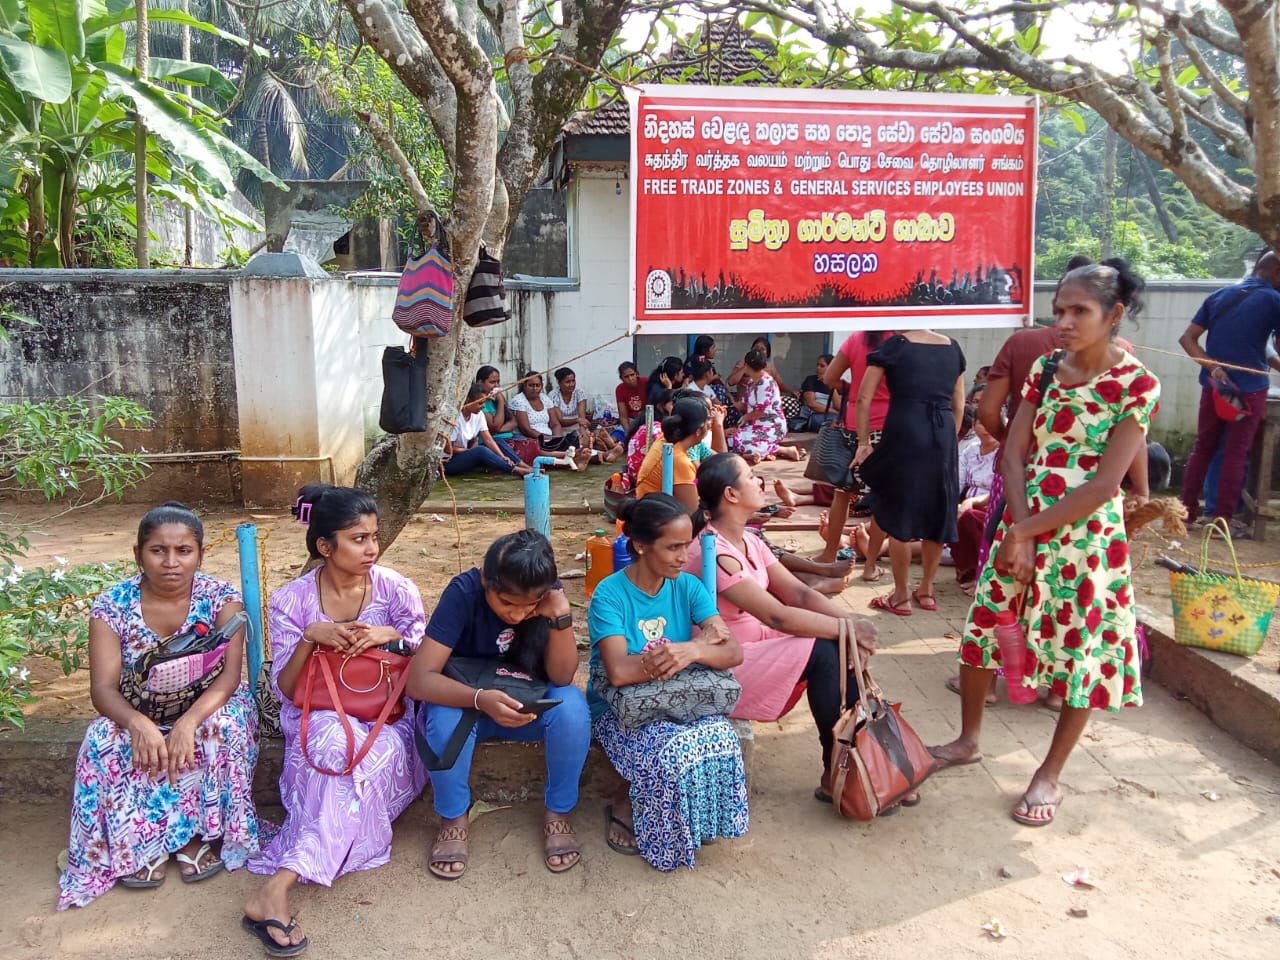 Sri Lanka: 5,000 garment workers set to lose jobs after the temporary  closure of nearly 10 factories, amid continued decline in demand from  buyers - Business & Human Rights Resource Centre